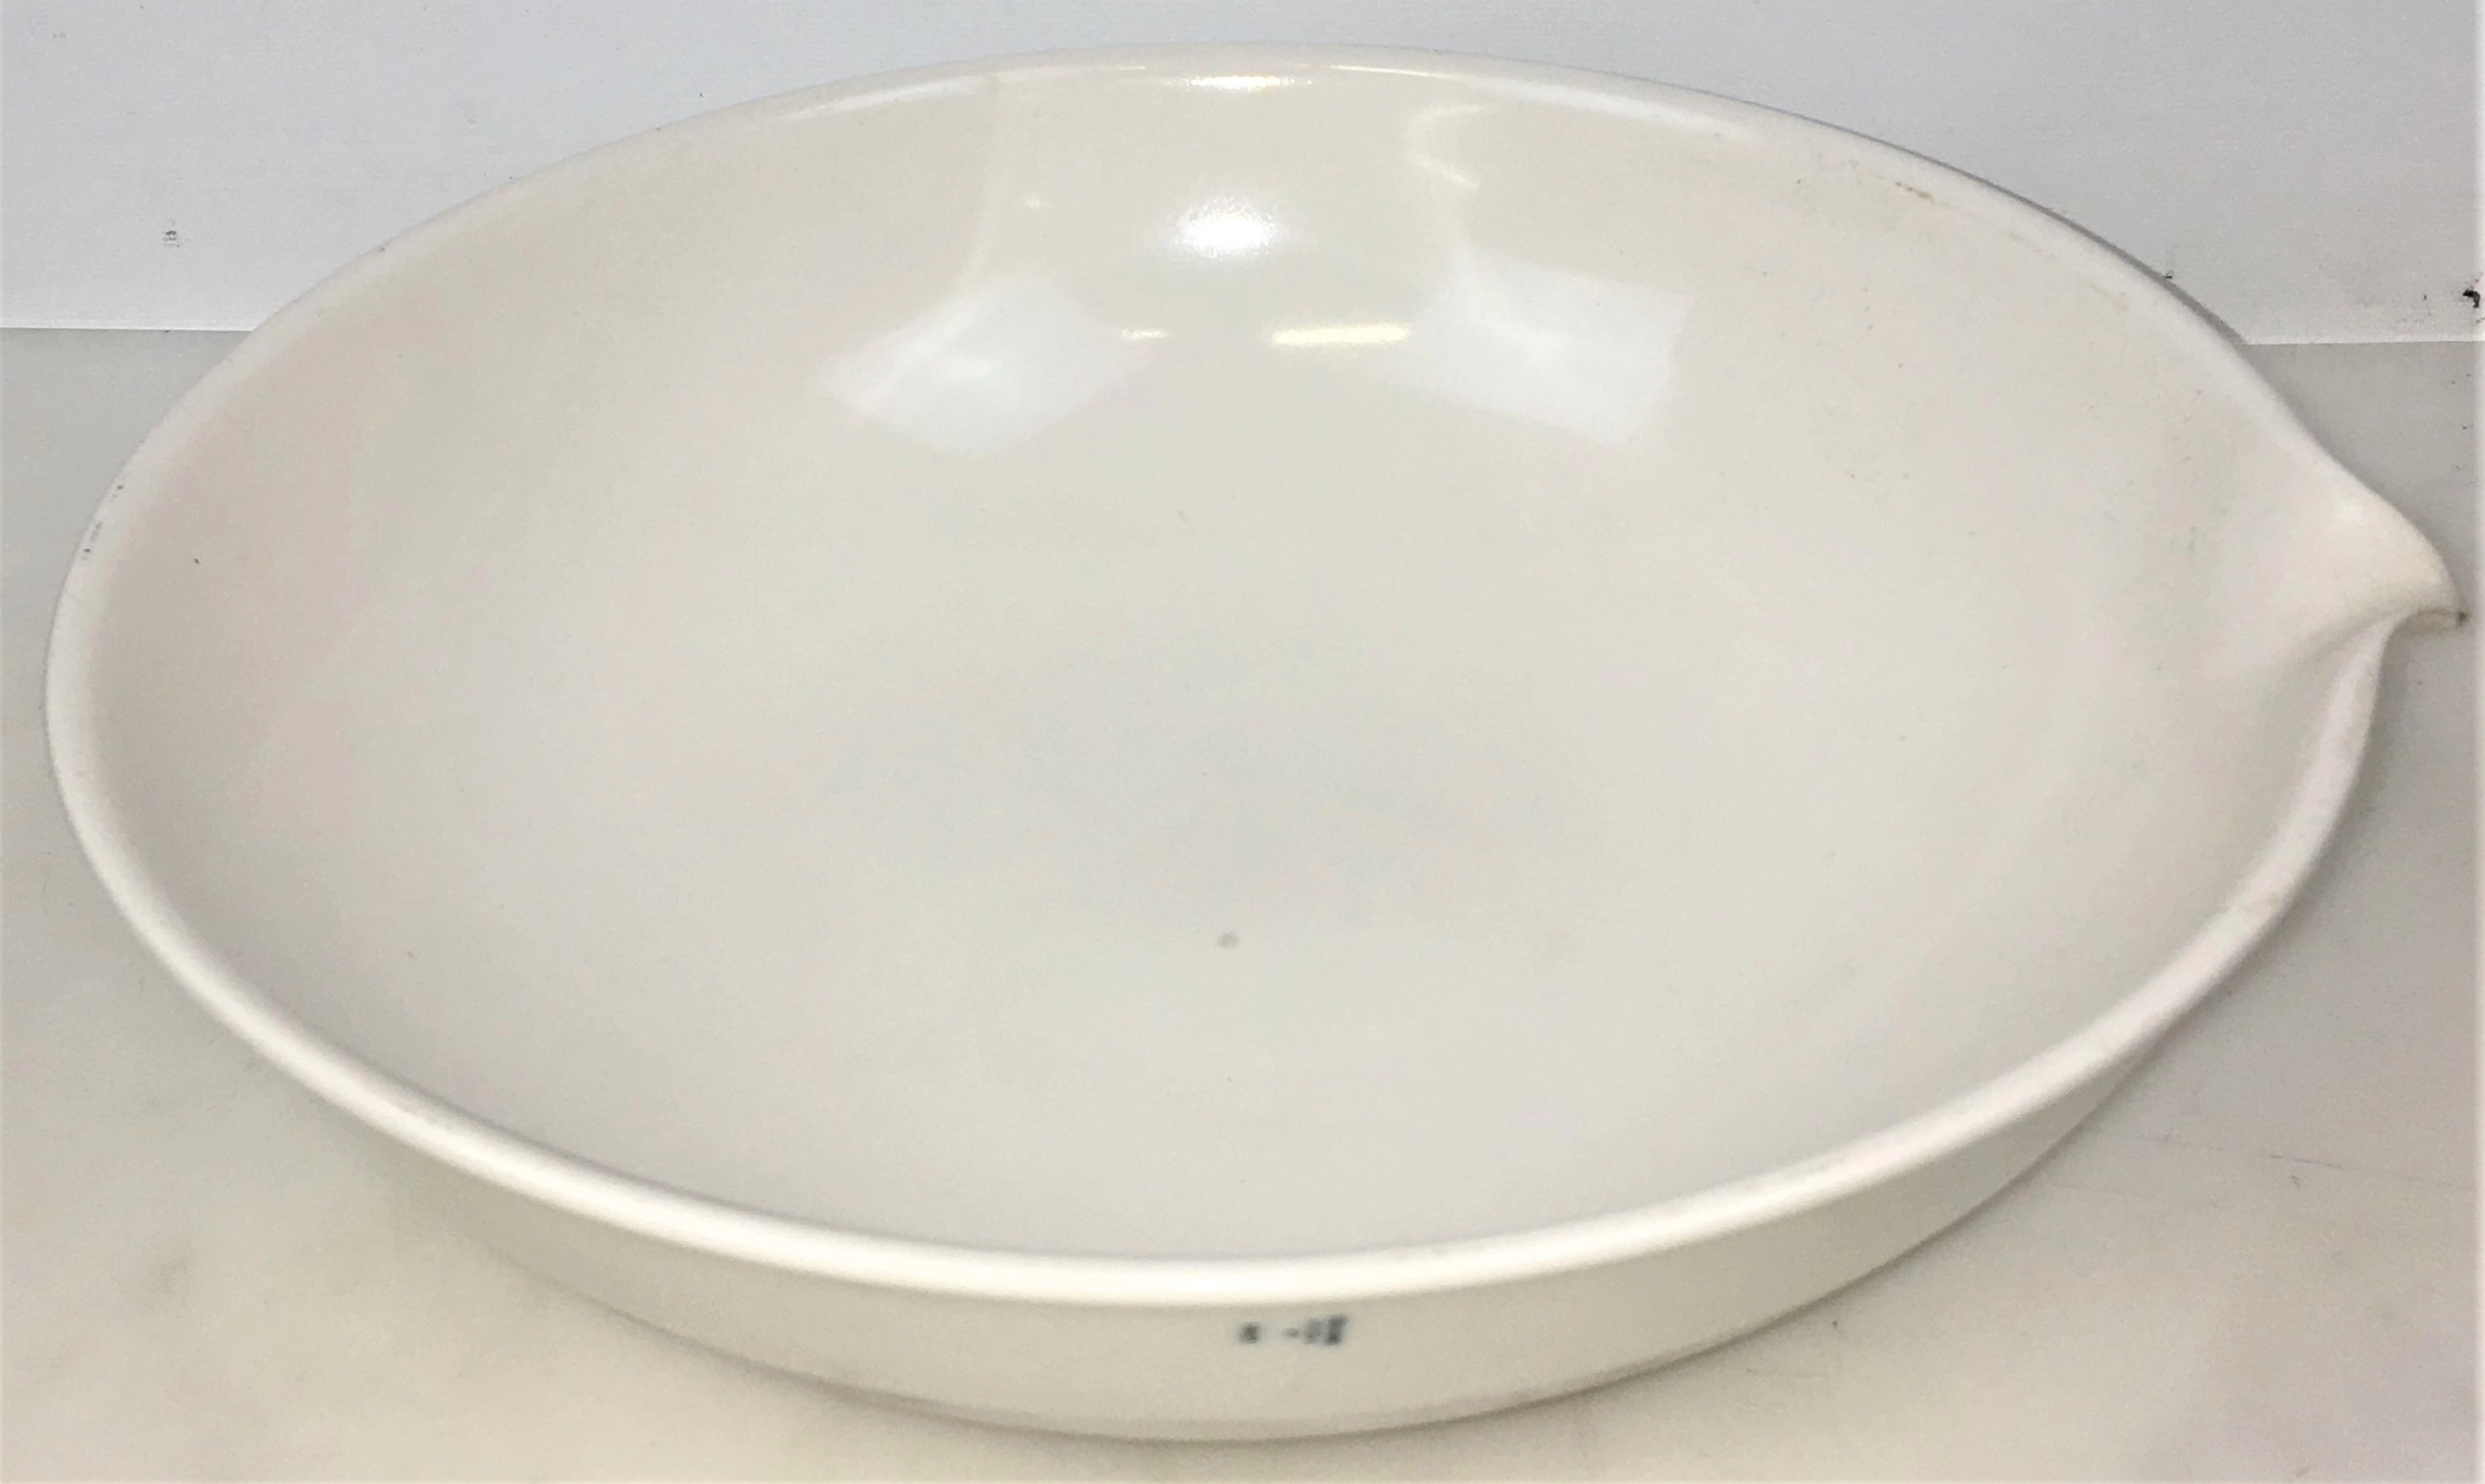 CooksTek 60209 (66209) Evaporating Dish with Pouring Lip - 2100mL